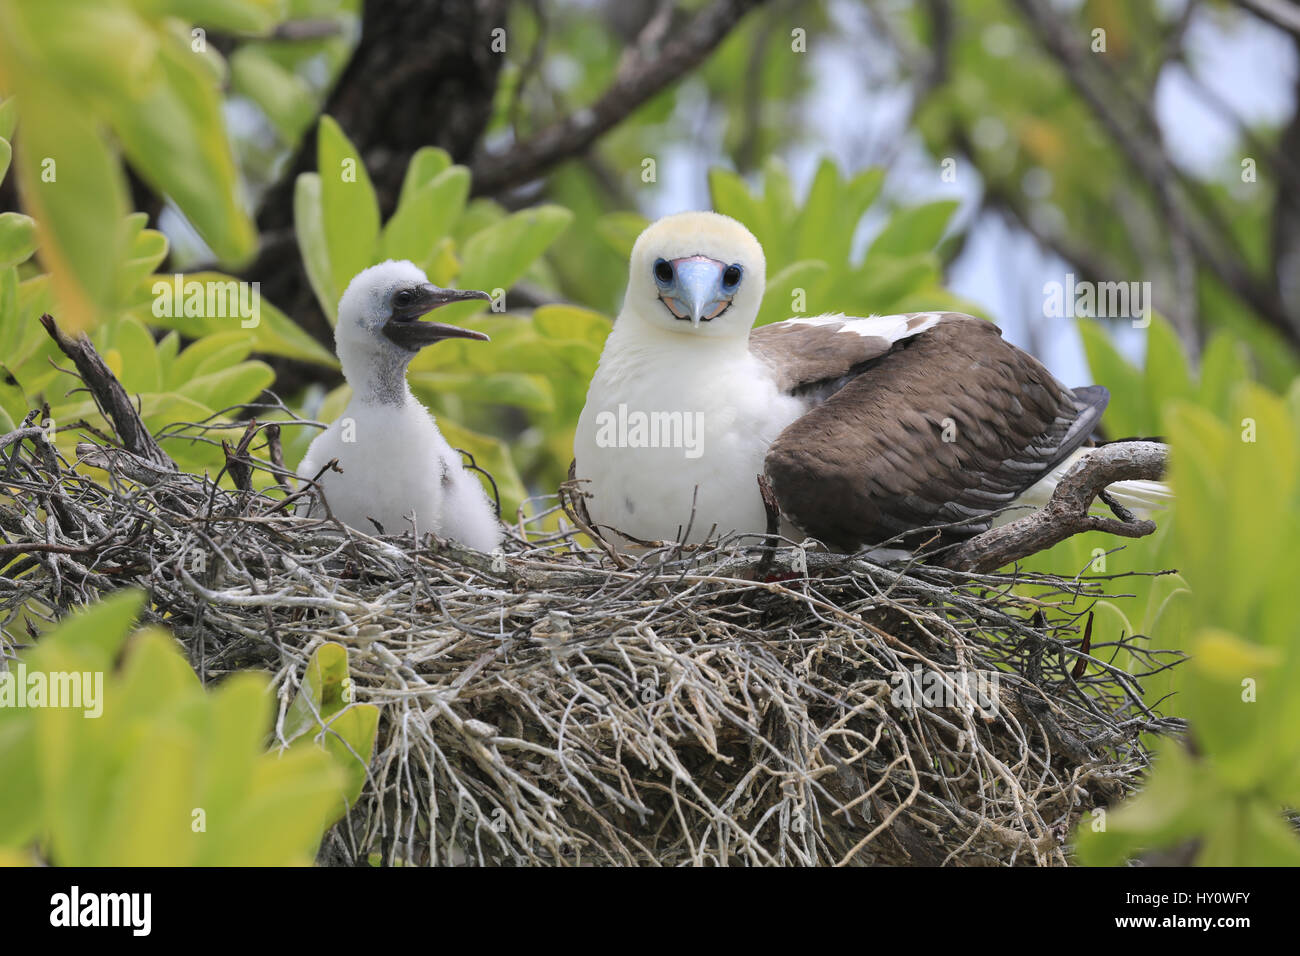 Red-footed booby bird with a chick in the nest, Christmas Island, Kiribati Stock Photo